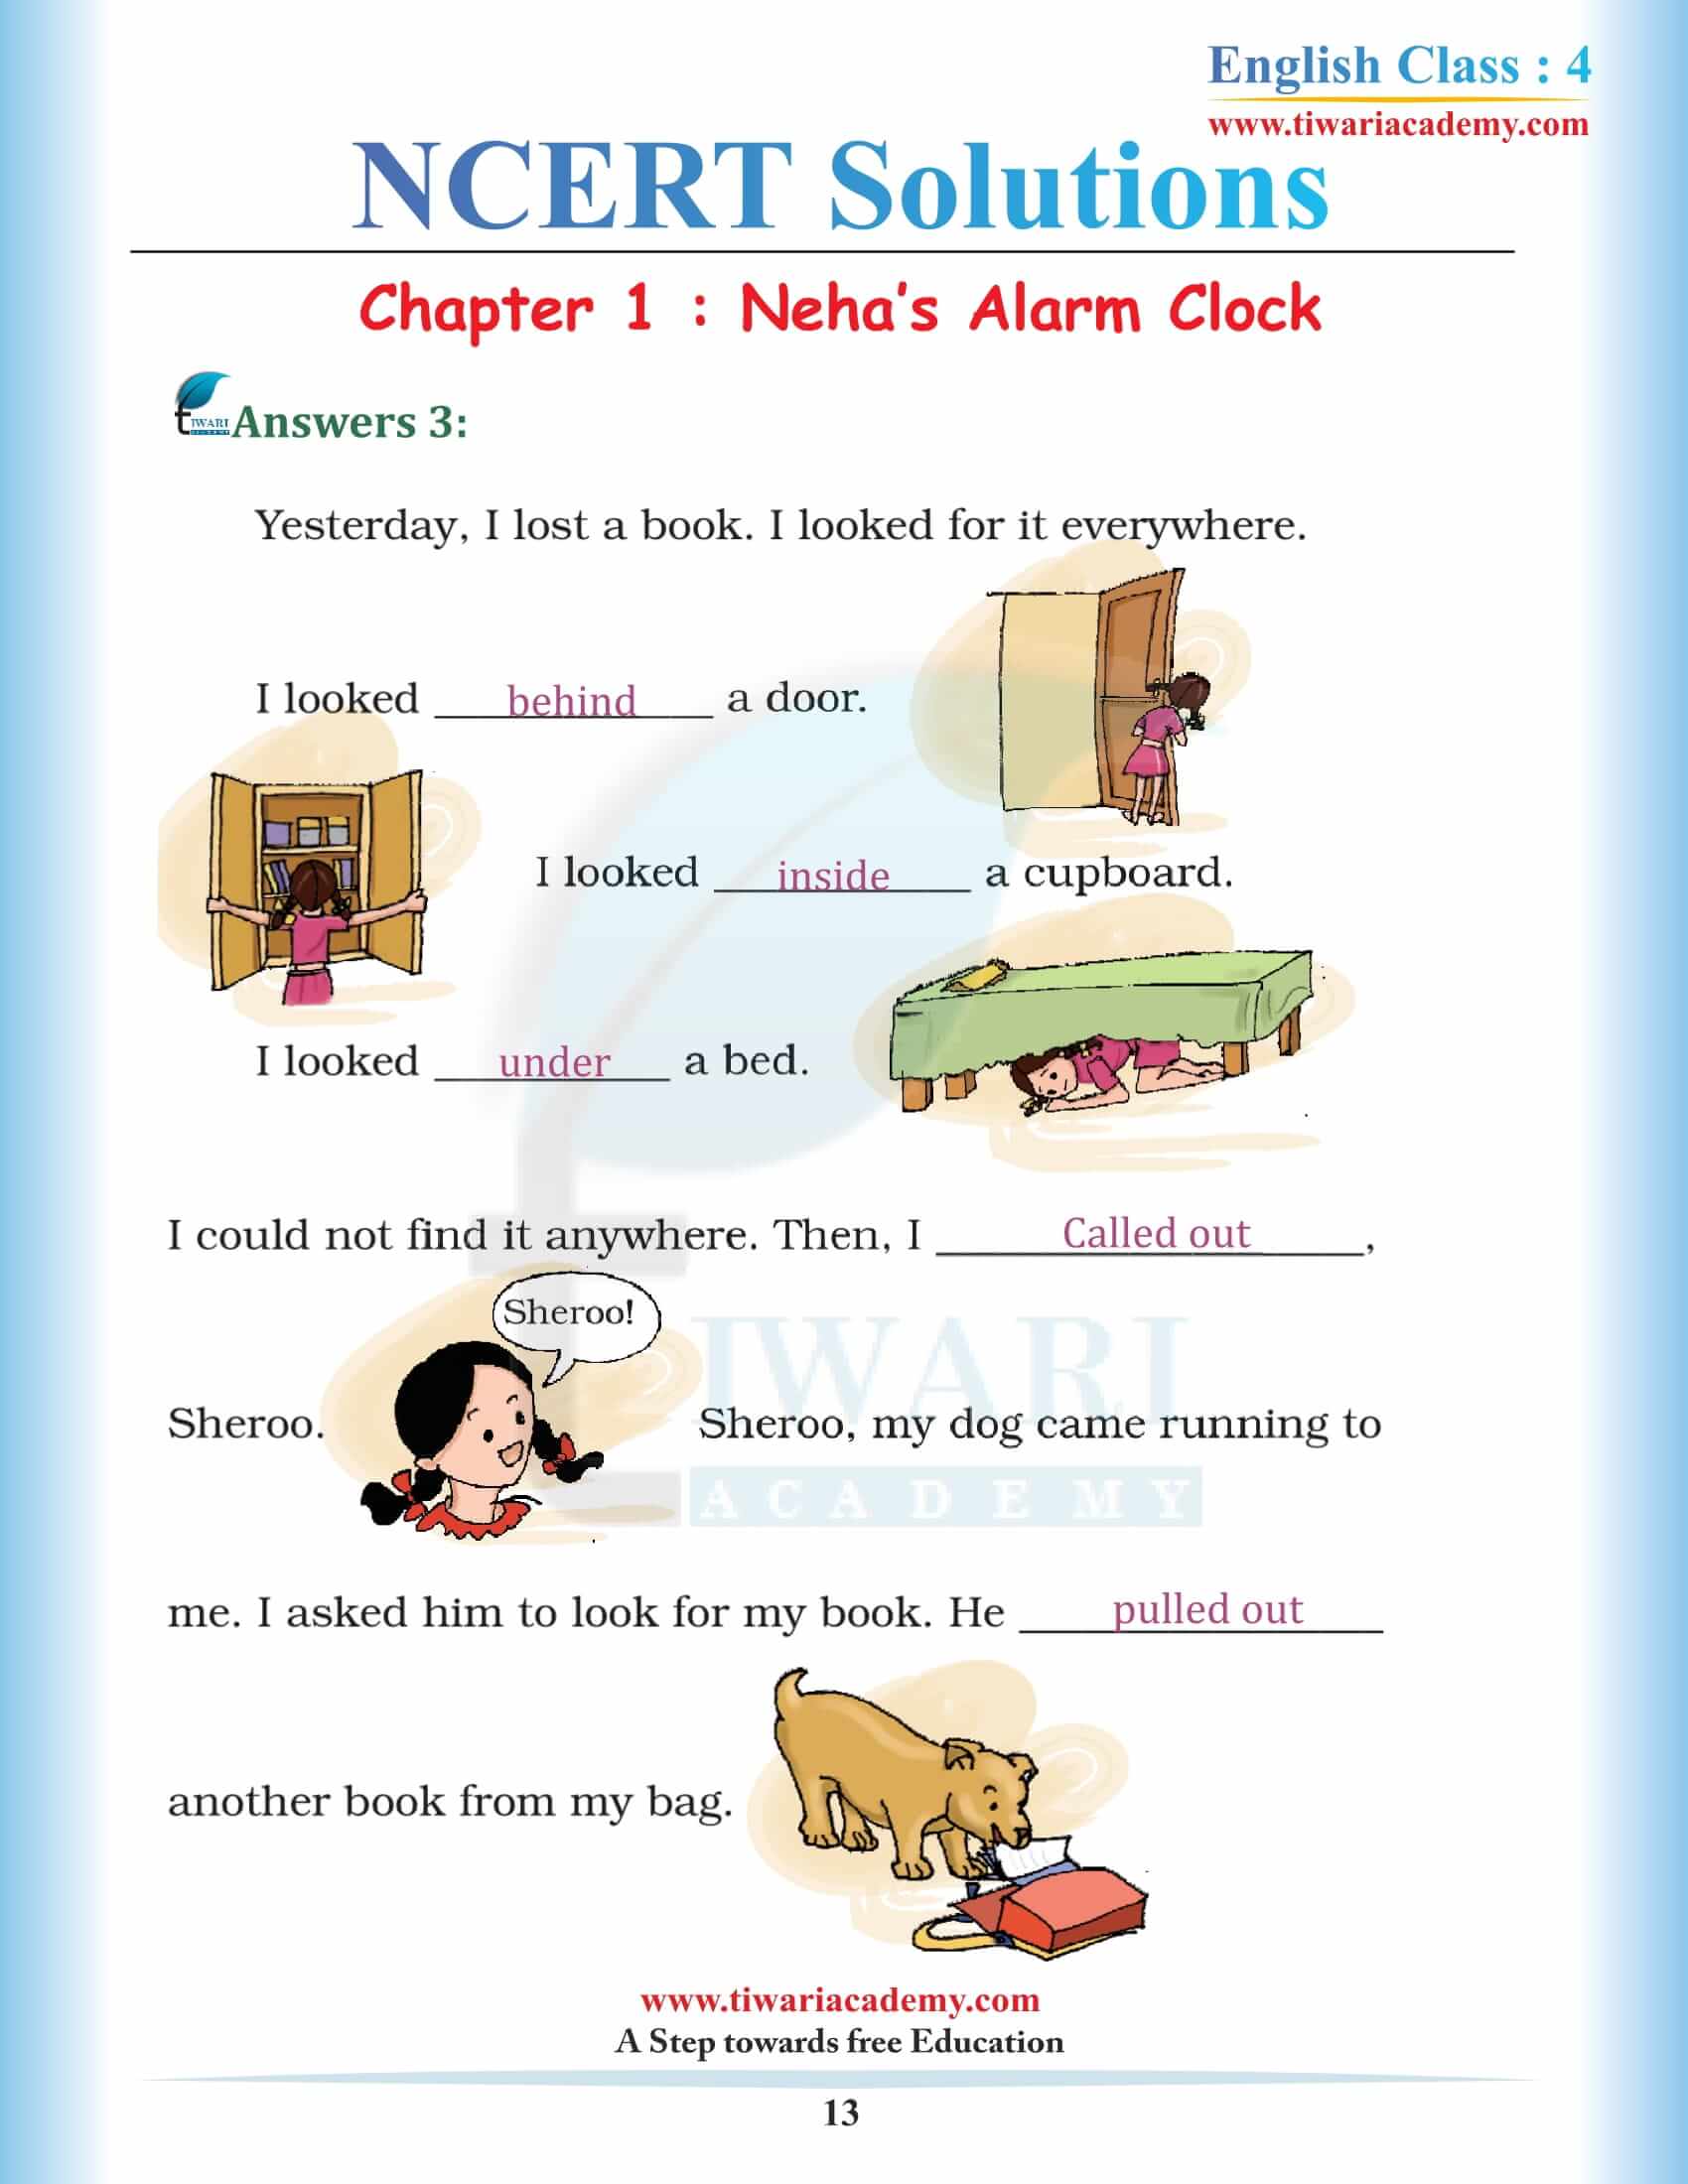 Class 4 English Unit 1 NCERT Solutions free download